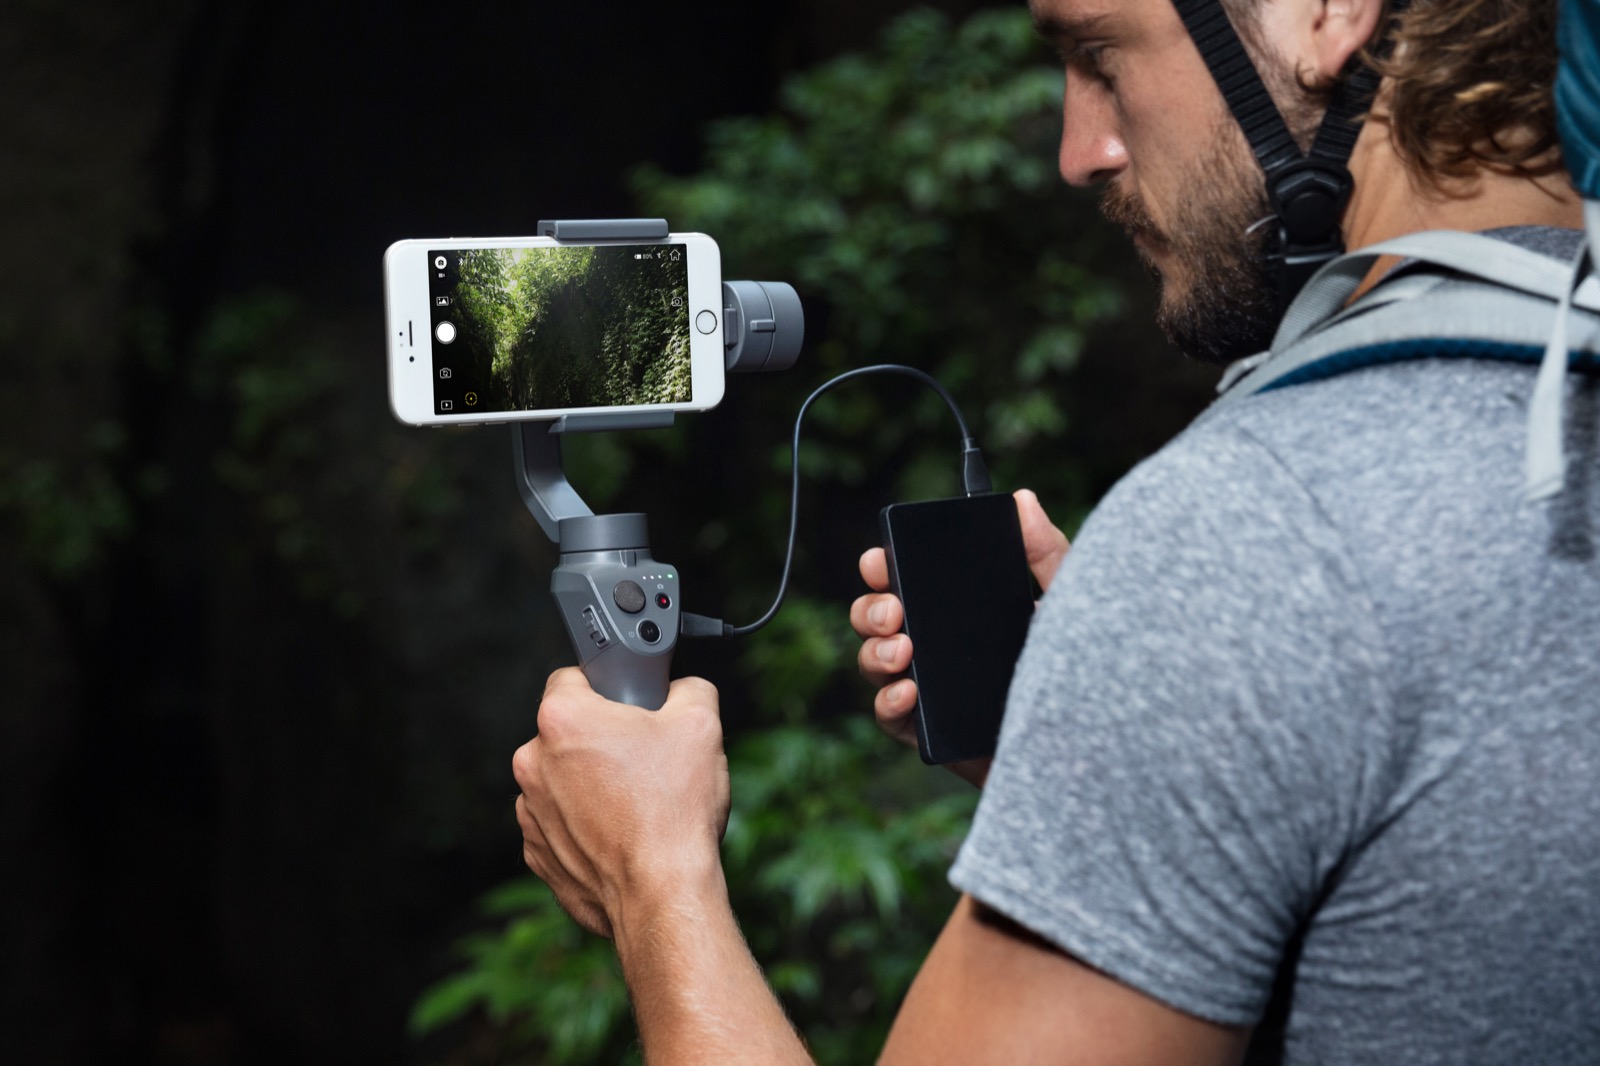 First glimpse of the DJI Osmo Mobile 2